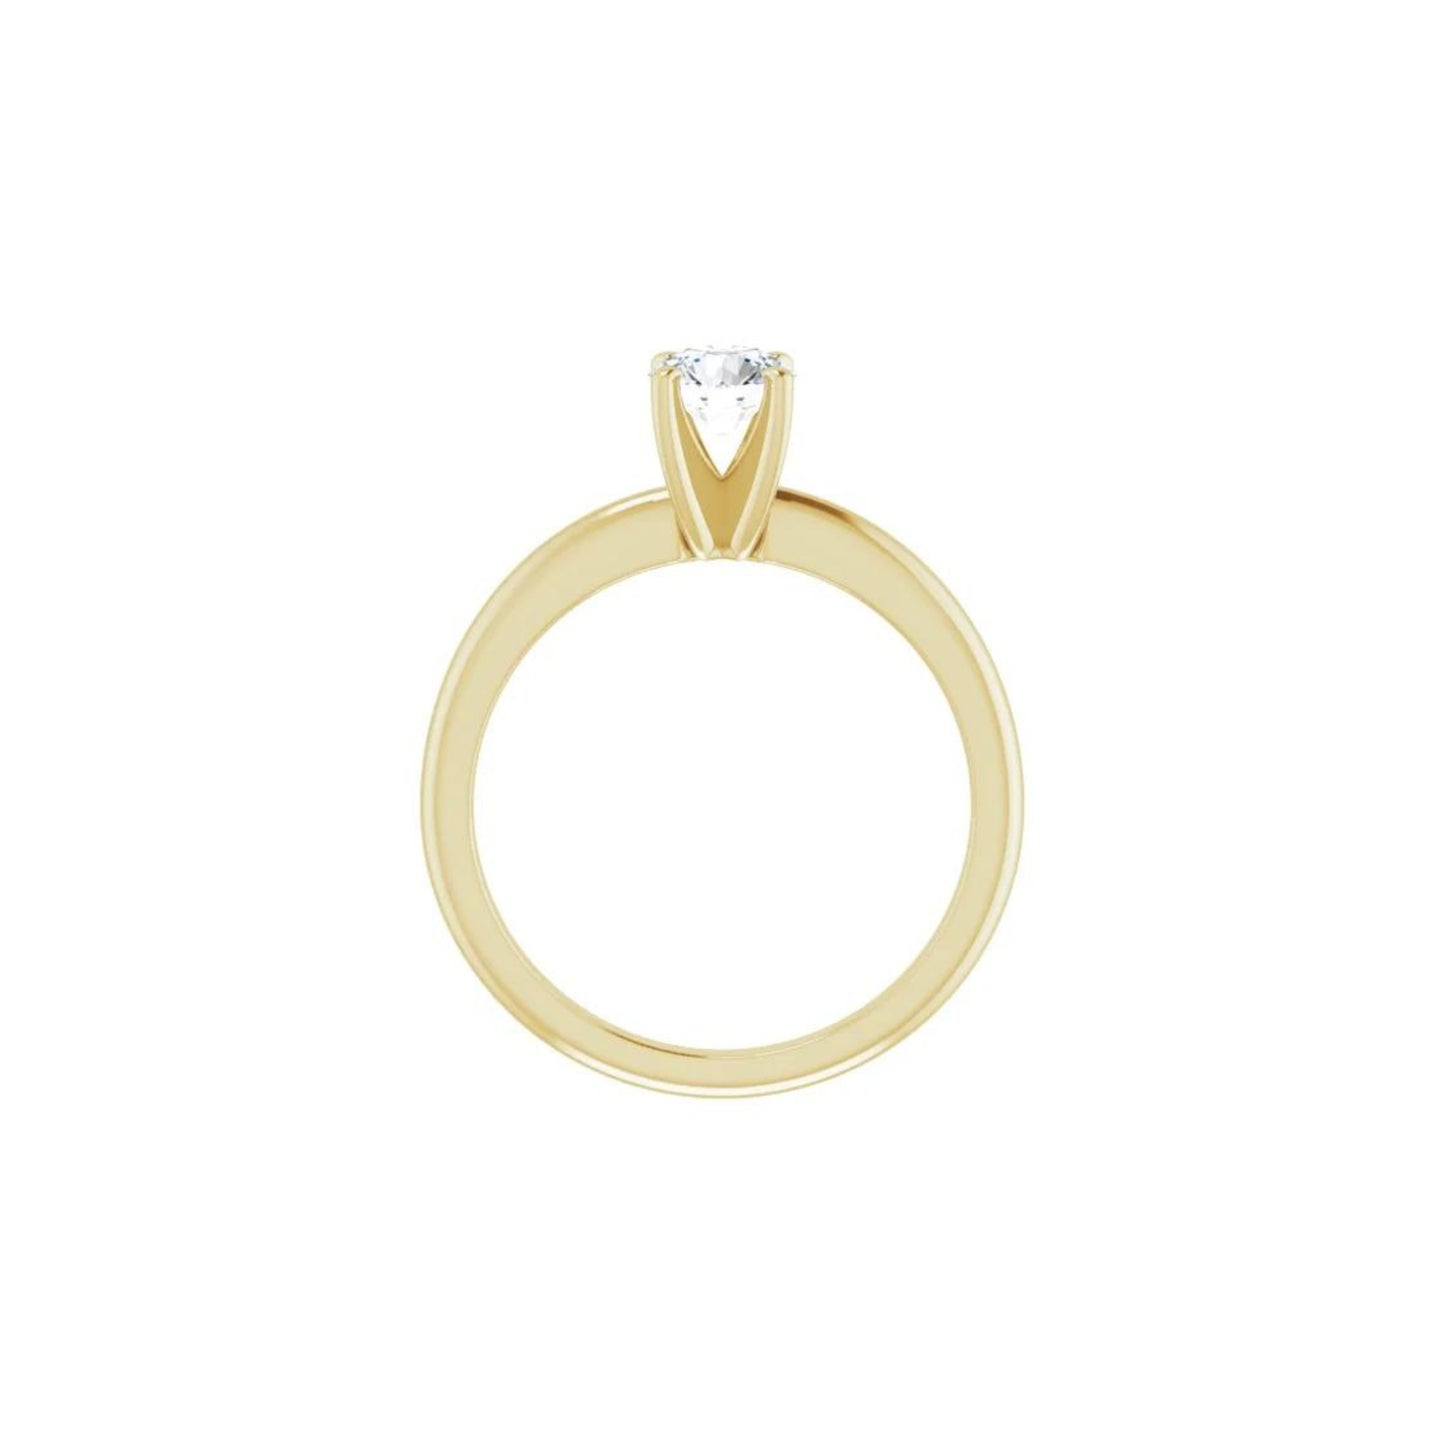 GOLDEN WINGS SOLITAIRE RING 